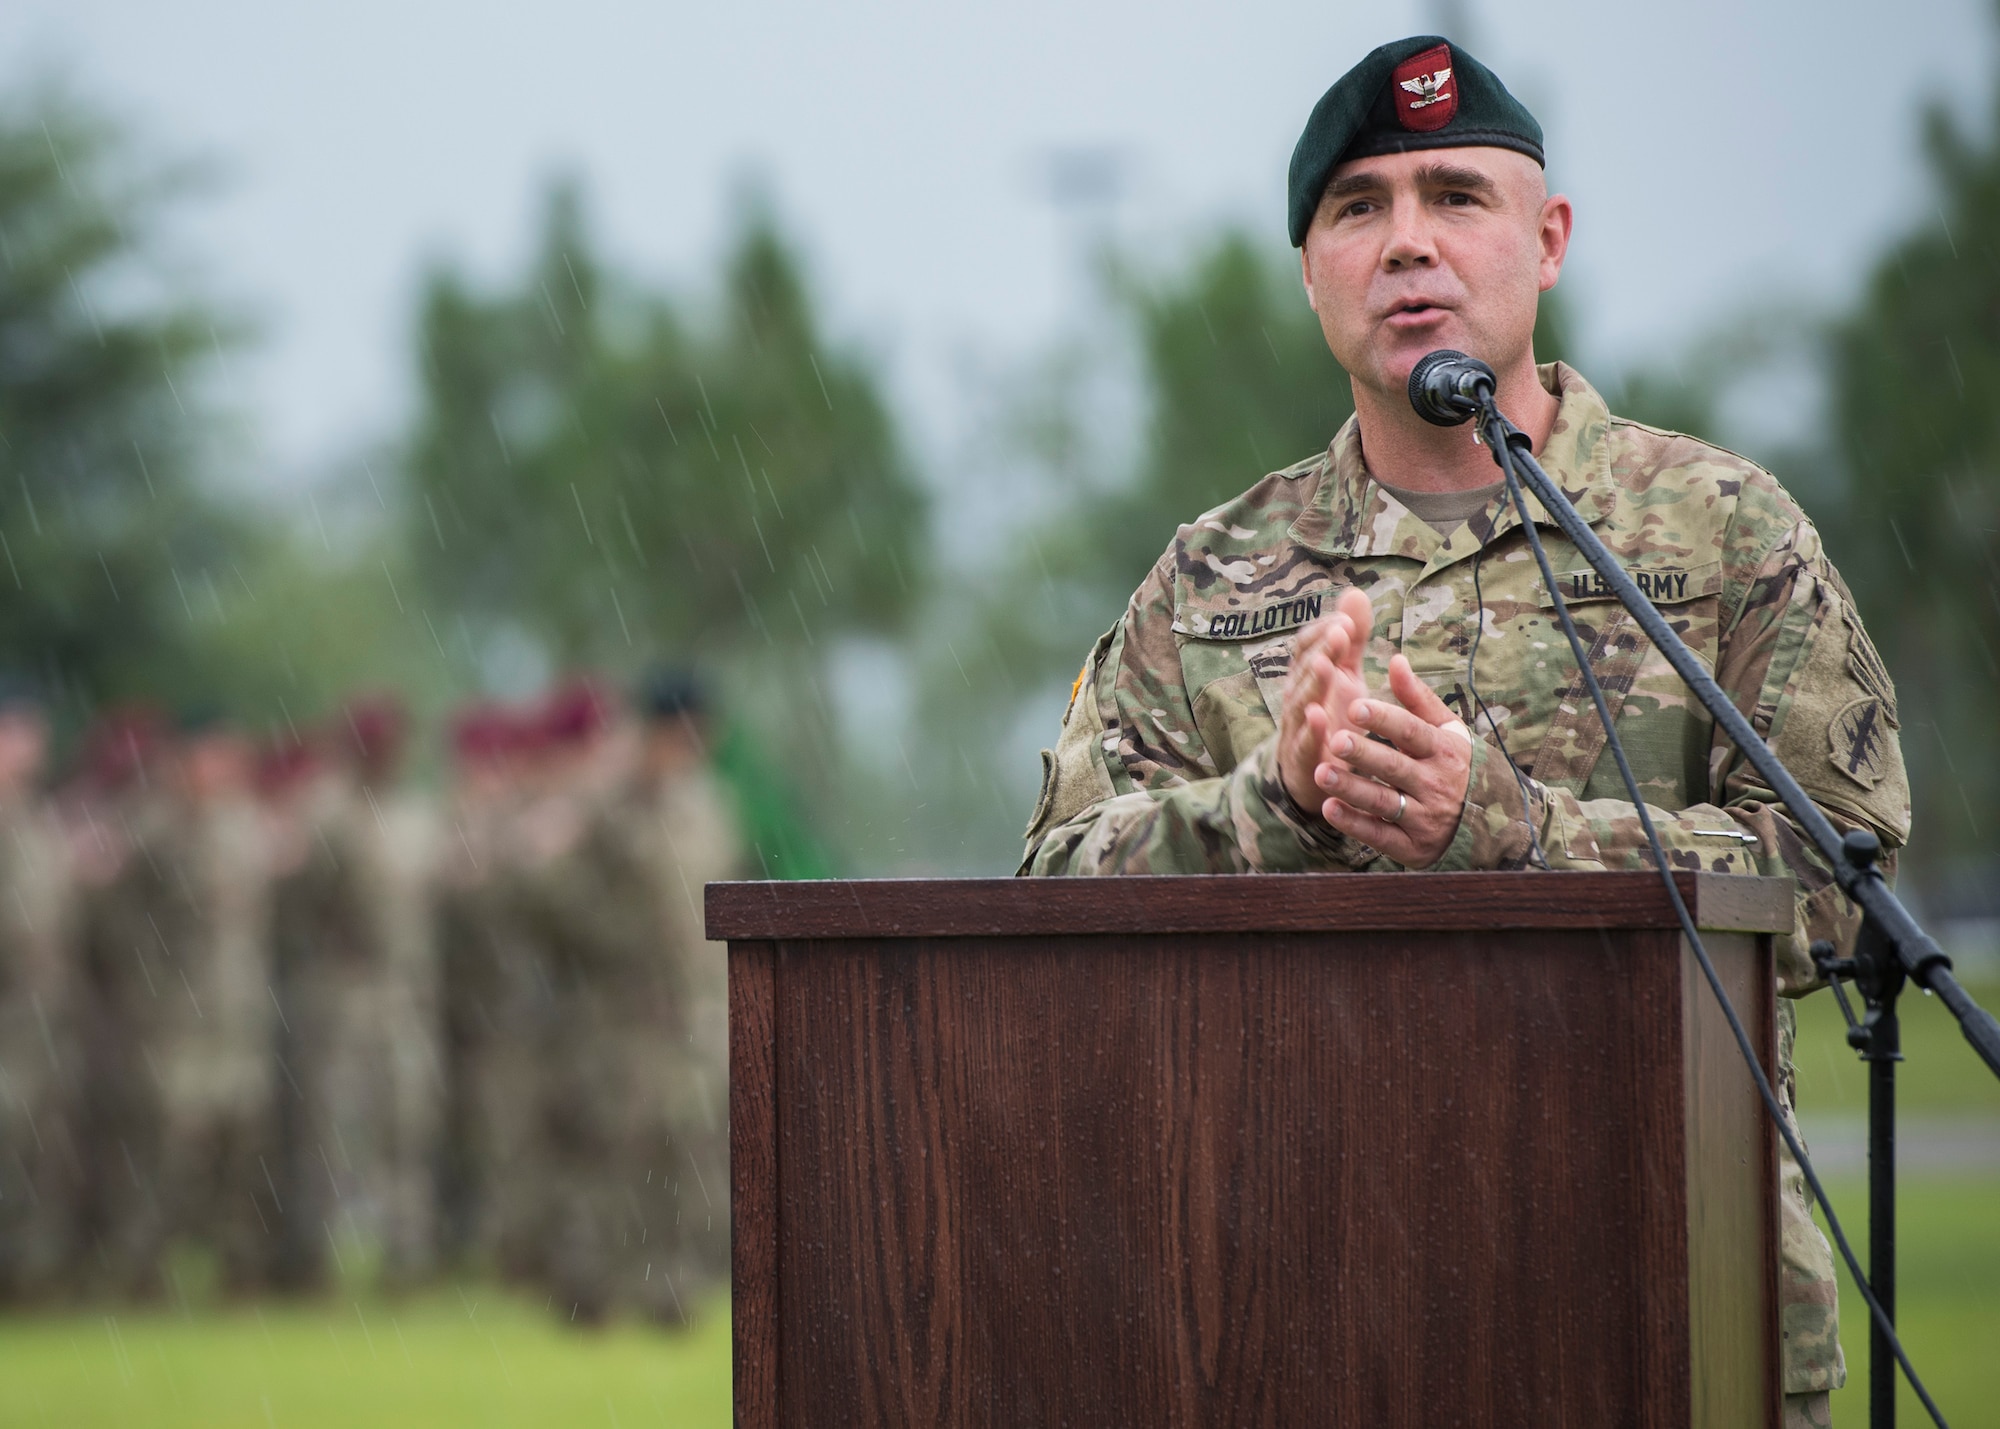 U.S. Army Col. Patrick Colloton, incoming commander, 7th Special Forces Group (Airborne), addresses the audience during a Florida thunderstorm at a change of command ceremony June 15 at Eglin Air Force Base, Fla. During the ceremony Col. Michael Ball relinquished command of the 7th SFG(A) to Col. Patrick Colloton. Colloton previously served as the 7th SFG(A) 1st Battalion commander. (U.S. Air Force photo/Ilka Cole)